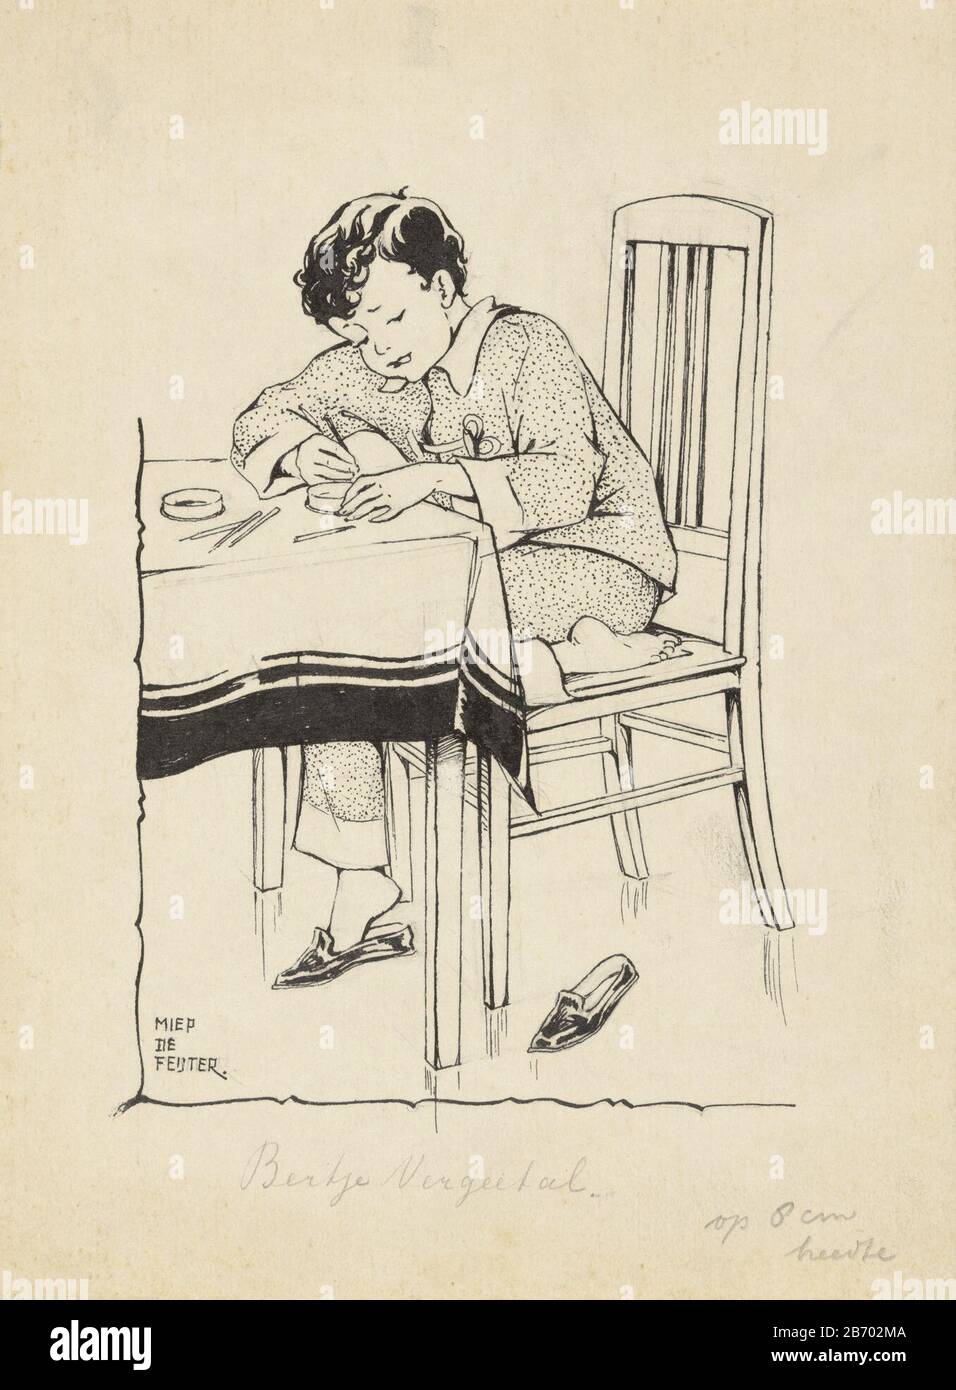 knutselende jongen aan een tafel a boy sits in his pajamas with a cloth covered table tinkering he has a stick or writing in hand manufacturer artist miep the feijter personally signed date ca 1928 ca 1941 physical features pen and brush in indian ink and pencil material paper indian ink pencil technique pen brush dimensions h 246 mm w 183 mm subject boy child between toddler and youth table childrens games and play 2B702MA